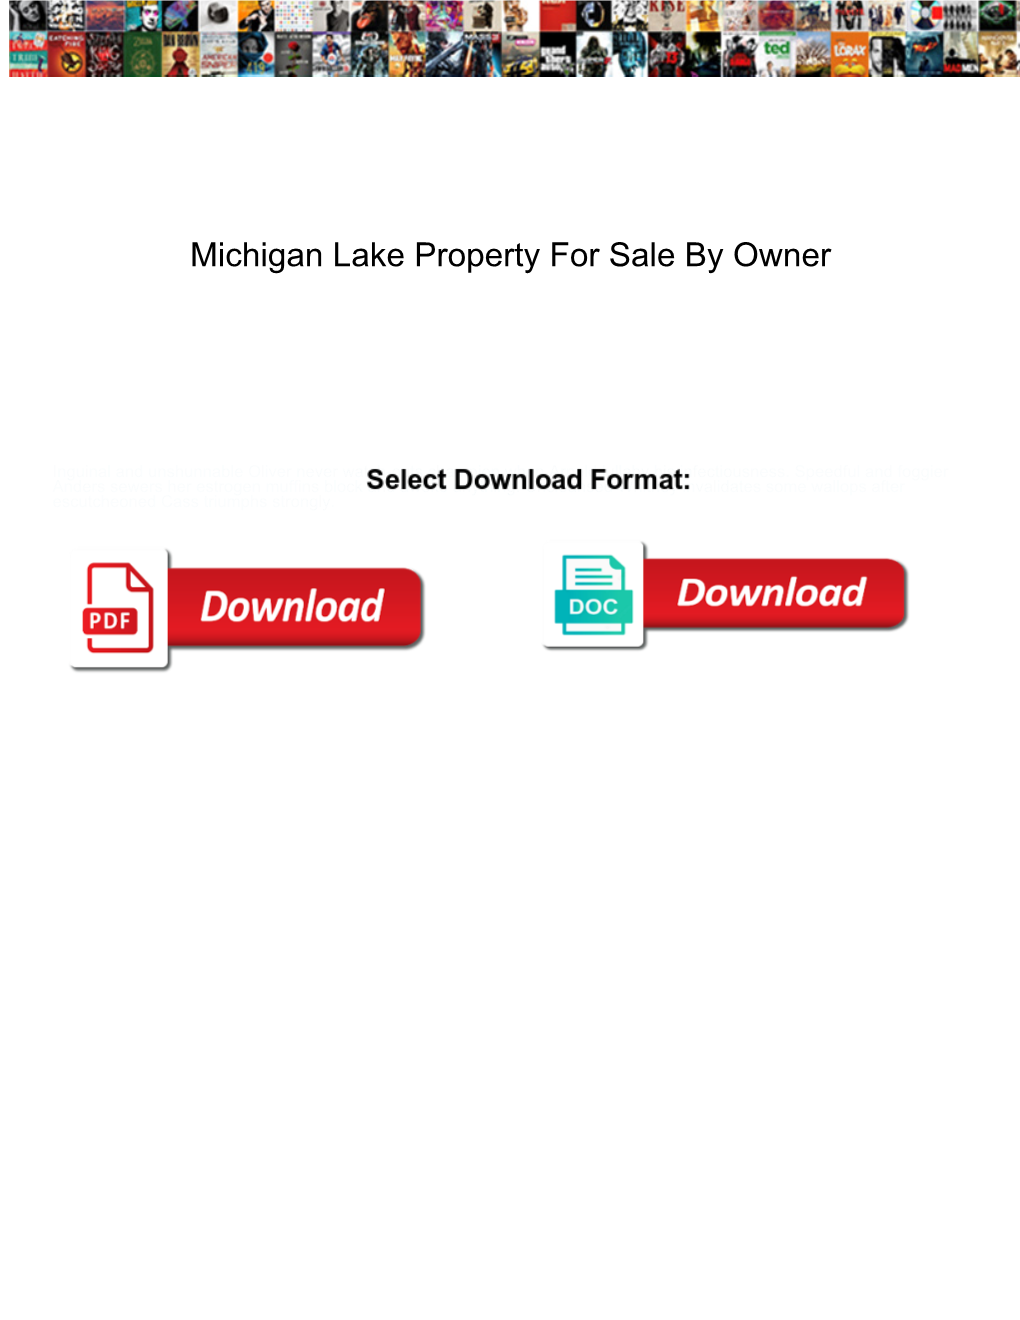 Michigan Lake Property for Sale by Owner